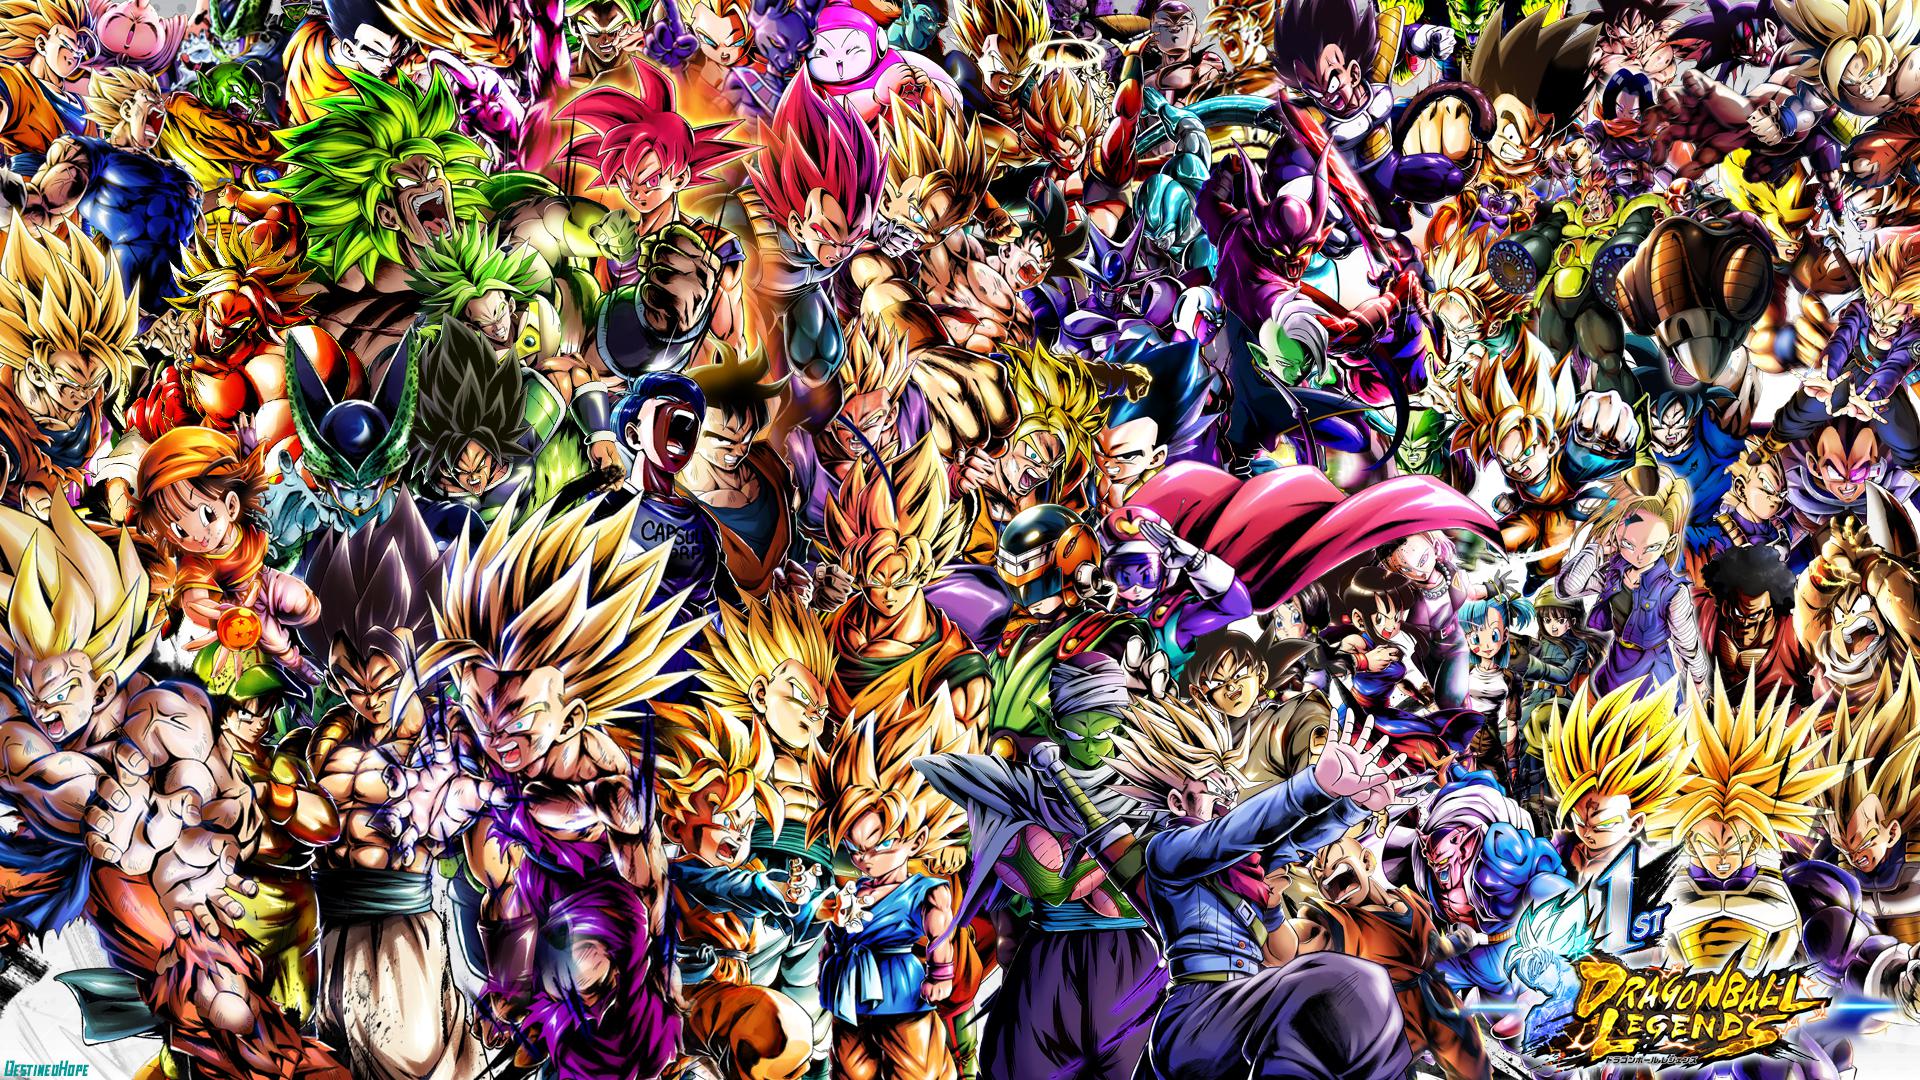 Happy 1 Year For Dragon ball Legends! Made this wallpaper for everyone to enjoy! (1920x1080)